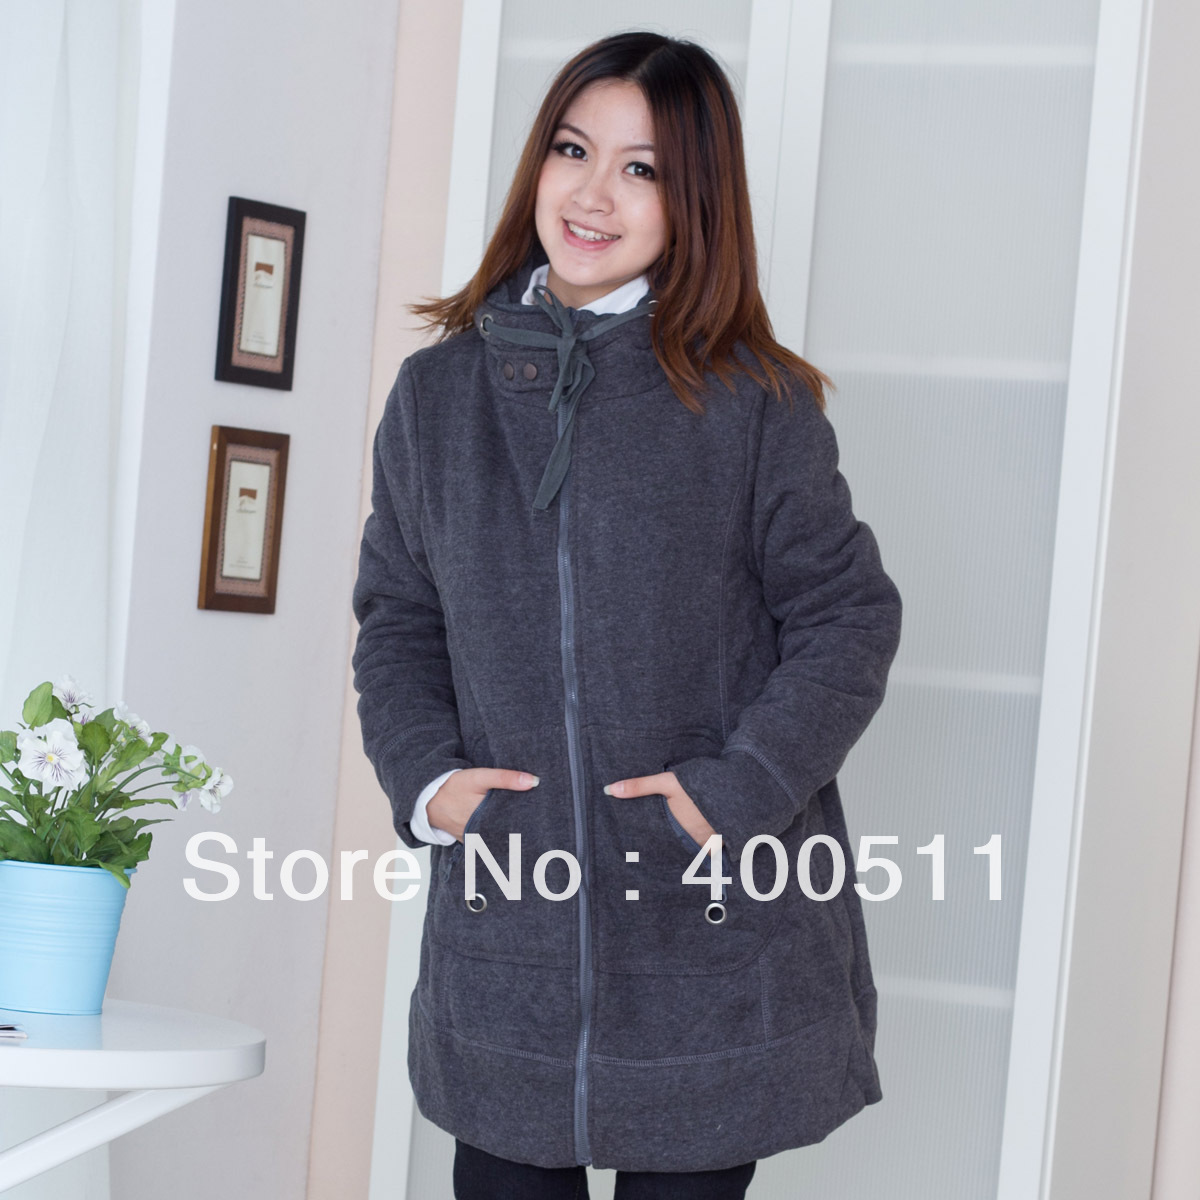 free shipping Maternity cotton-padded jacket casual fleece fabric thermal maternity winter outerwear 601